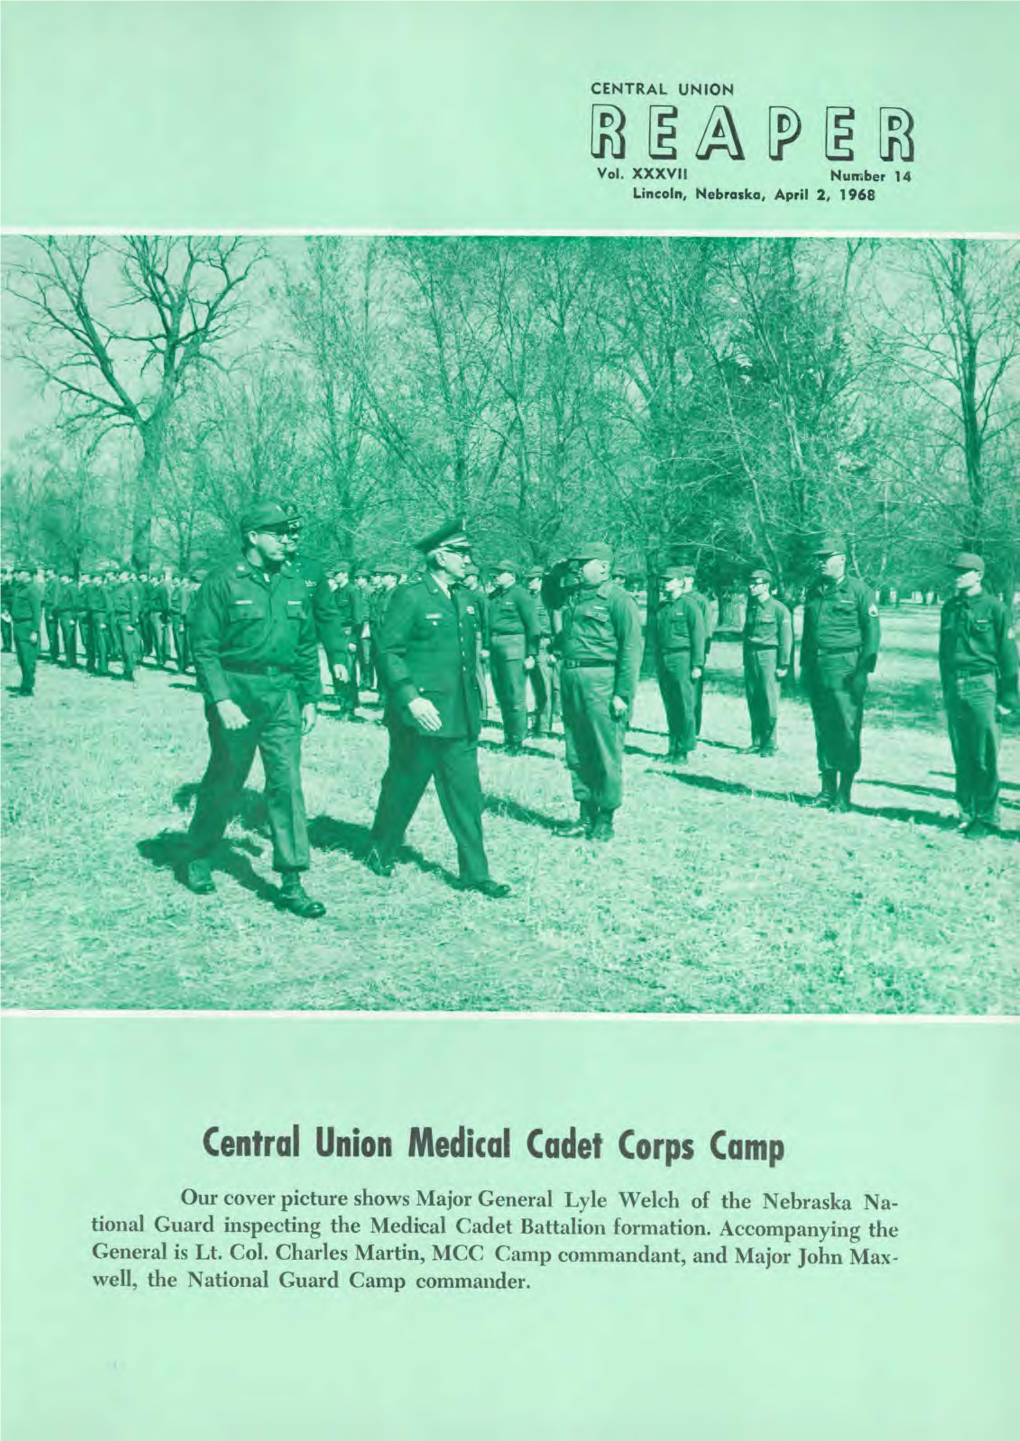 Central Union Medical Cadet Corps Camp